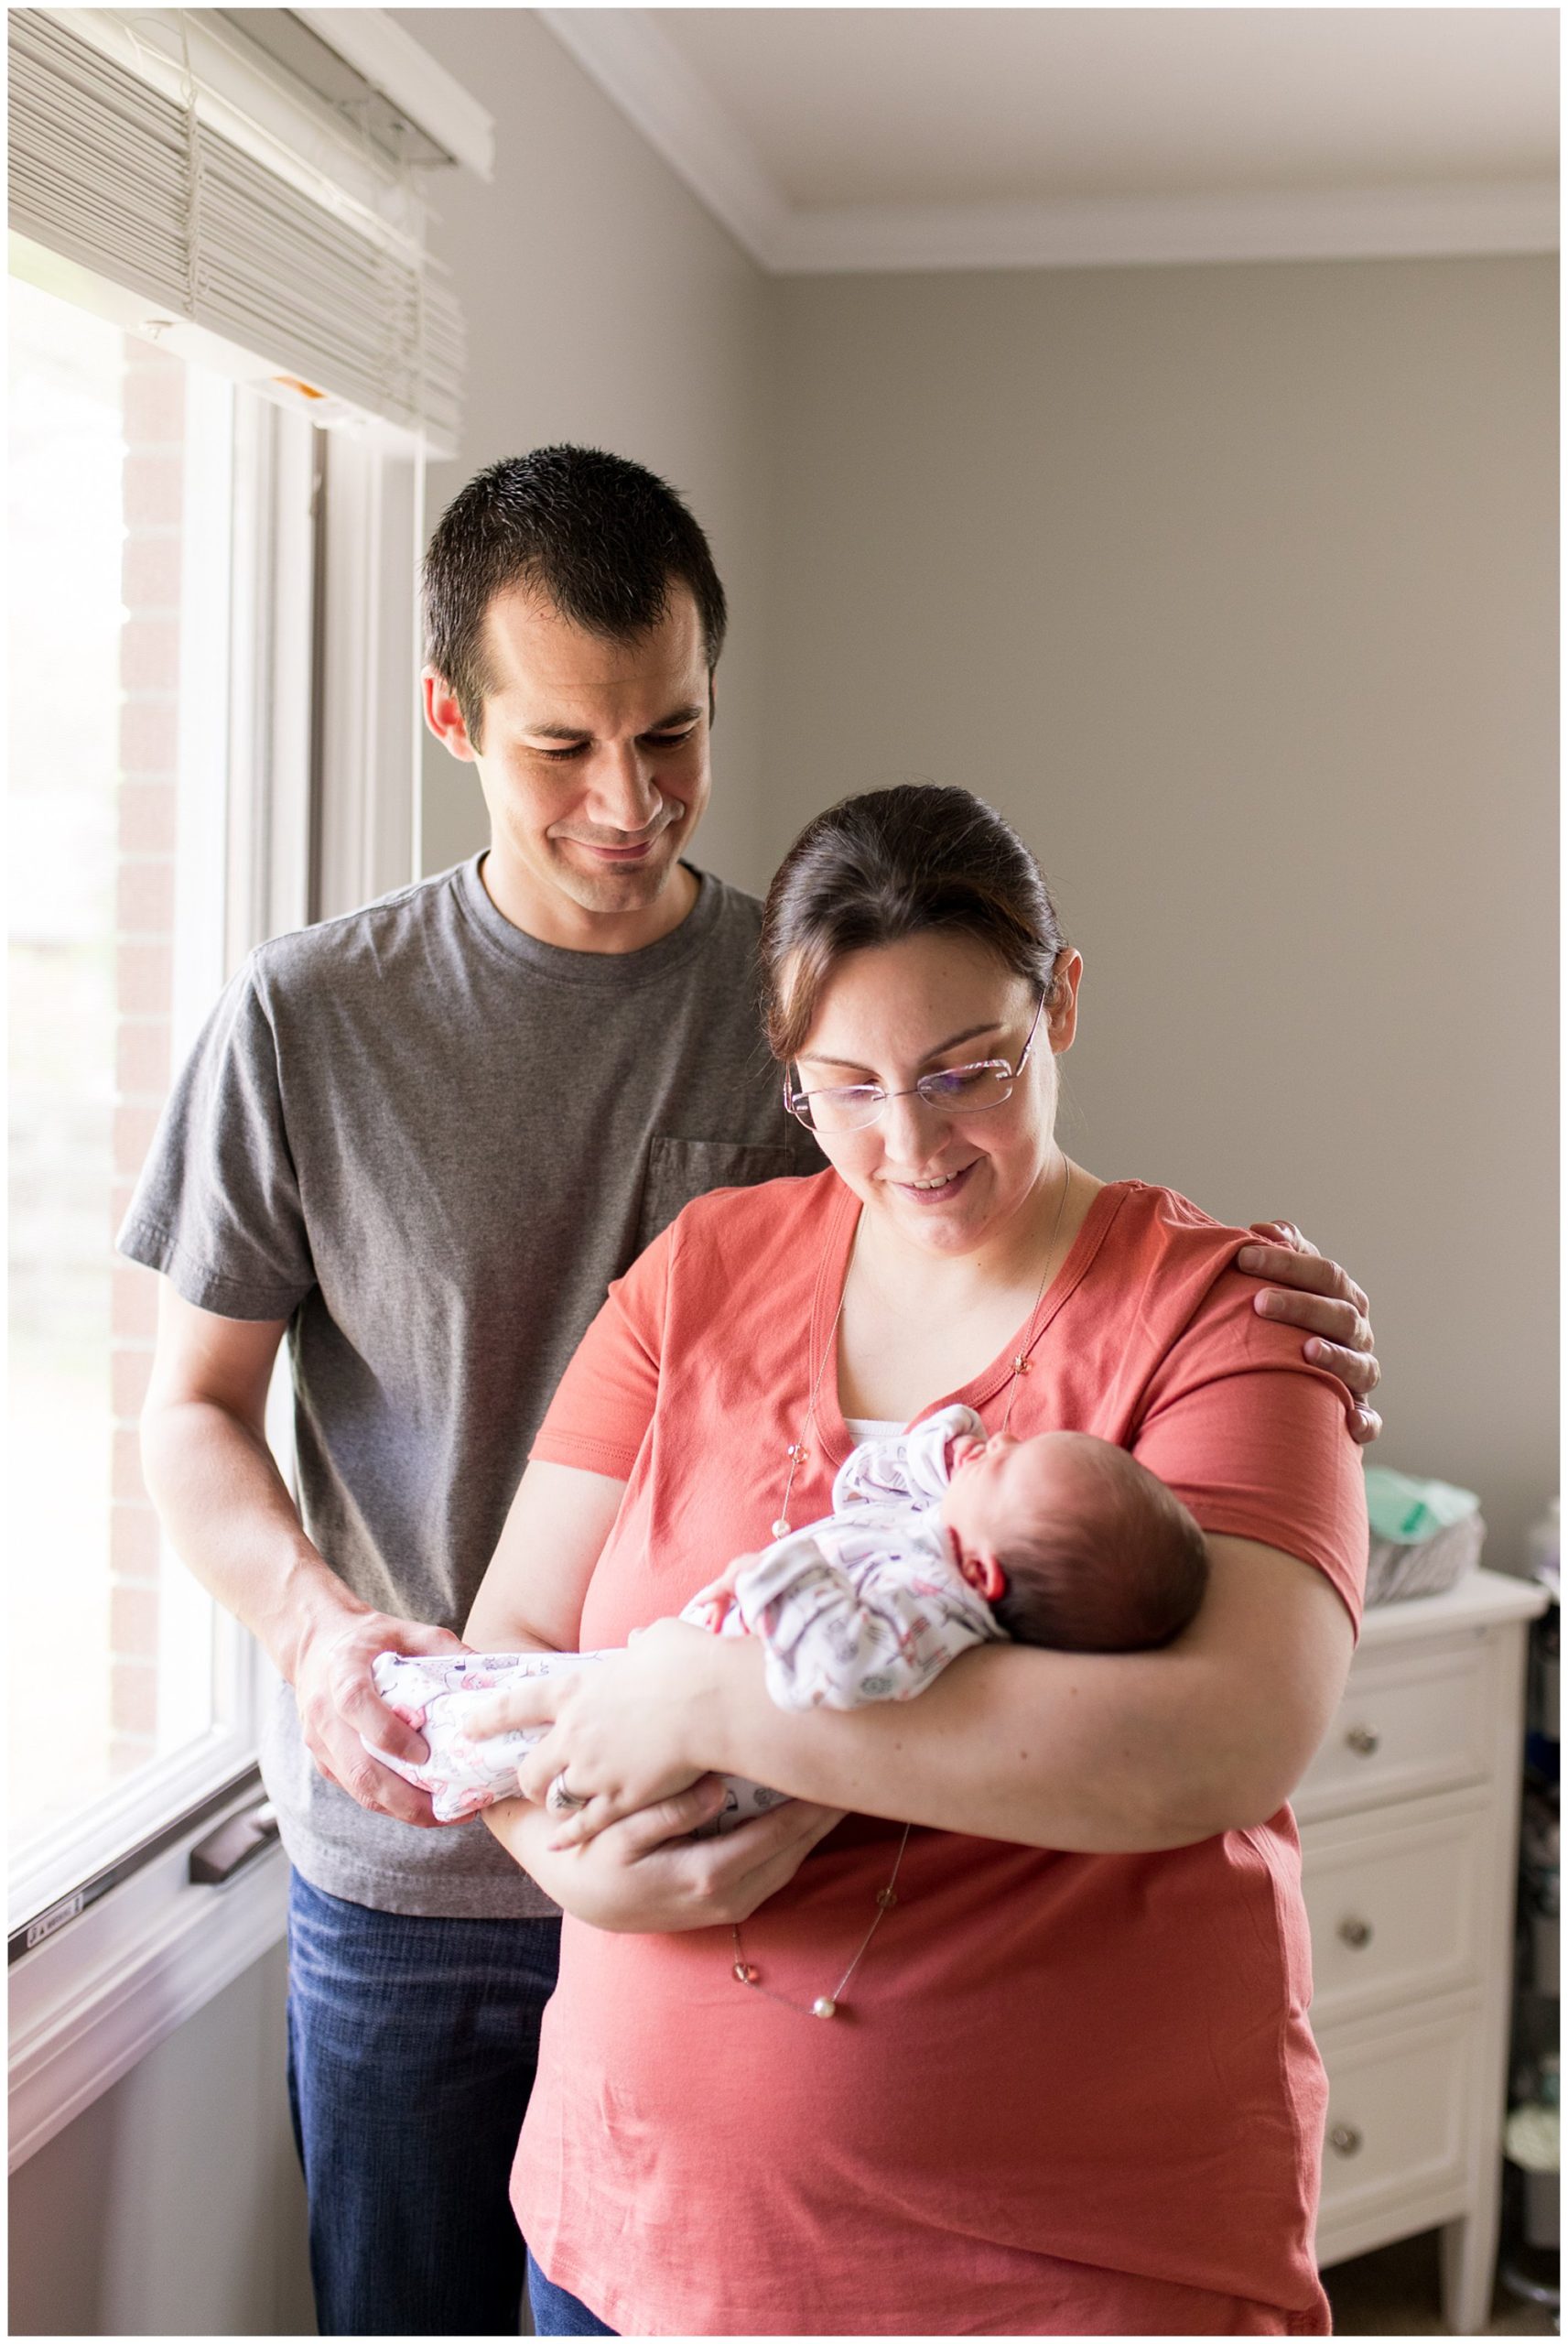 mom holds baby while dad looks onward during newborn session at home